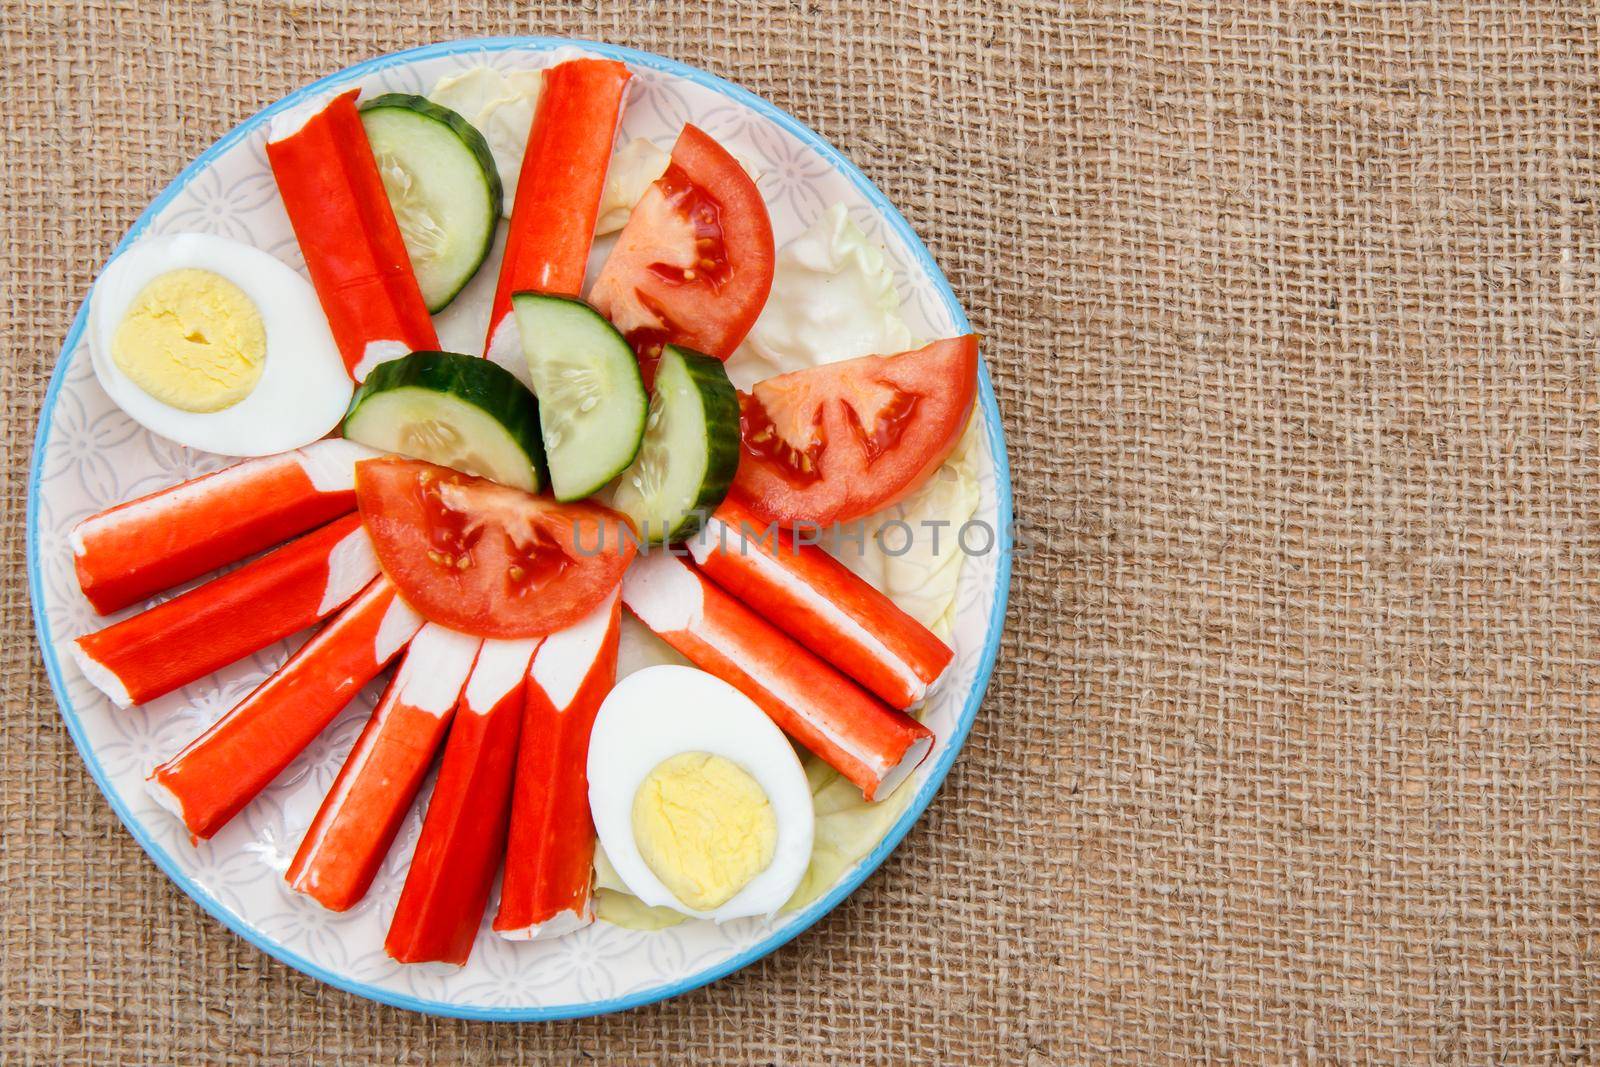 Plate with crab sticks, boiled egg and freshly sliced tomato and cucumber on sackcloth. Top view with copy space